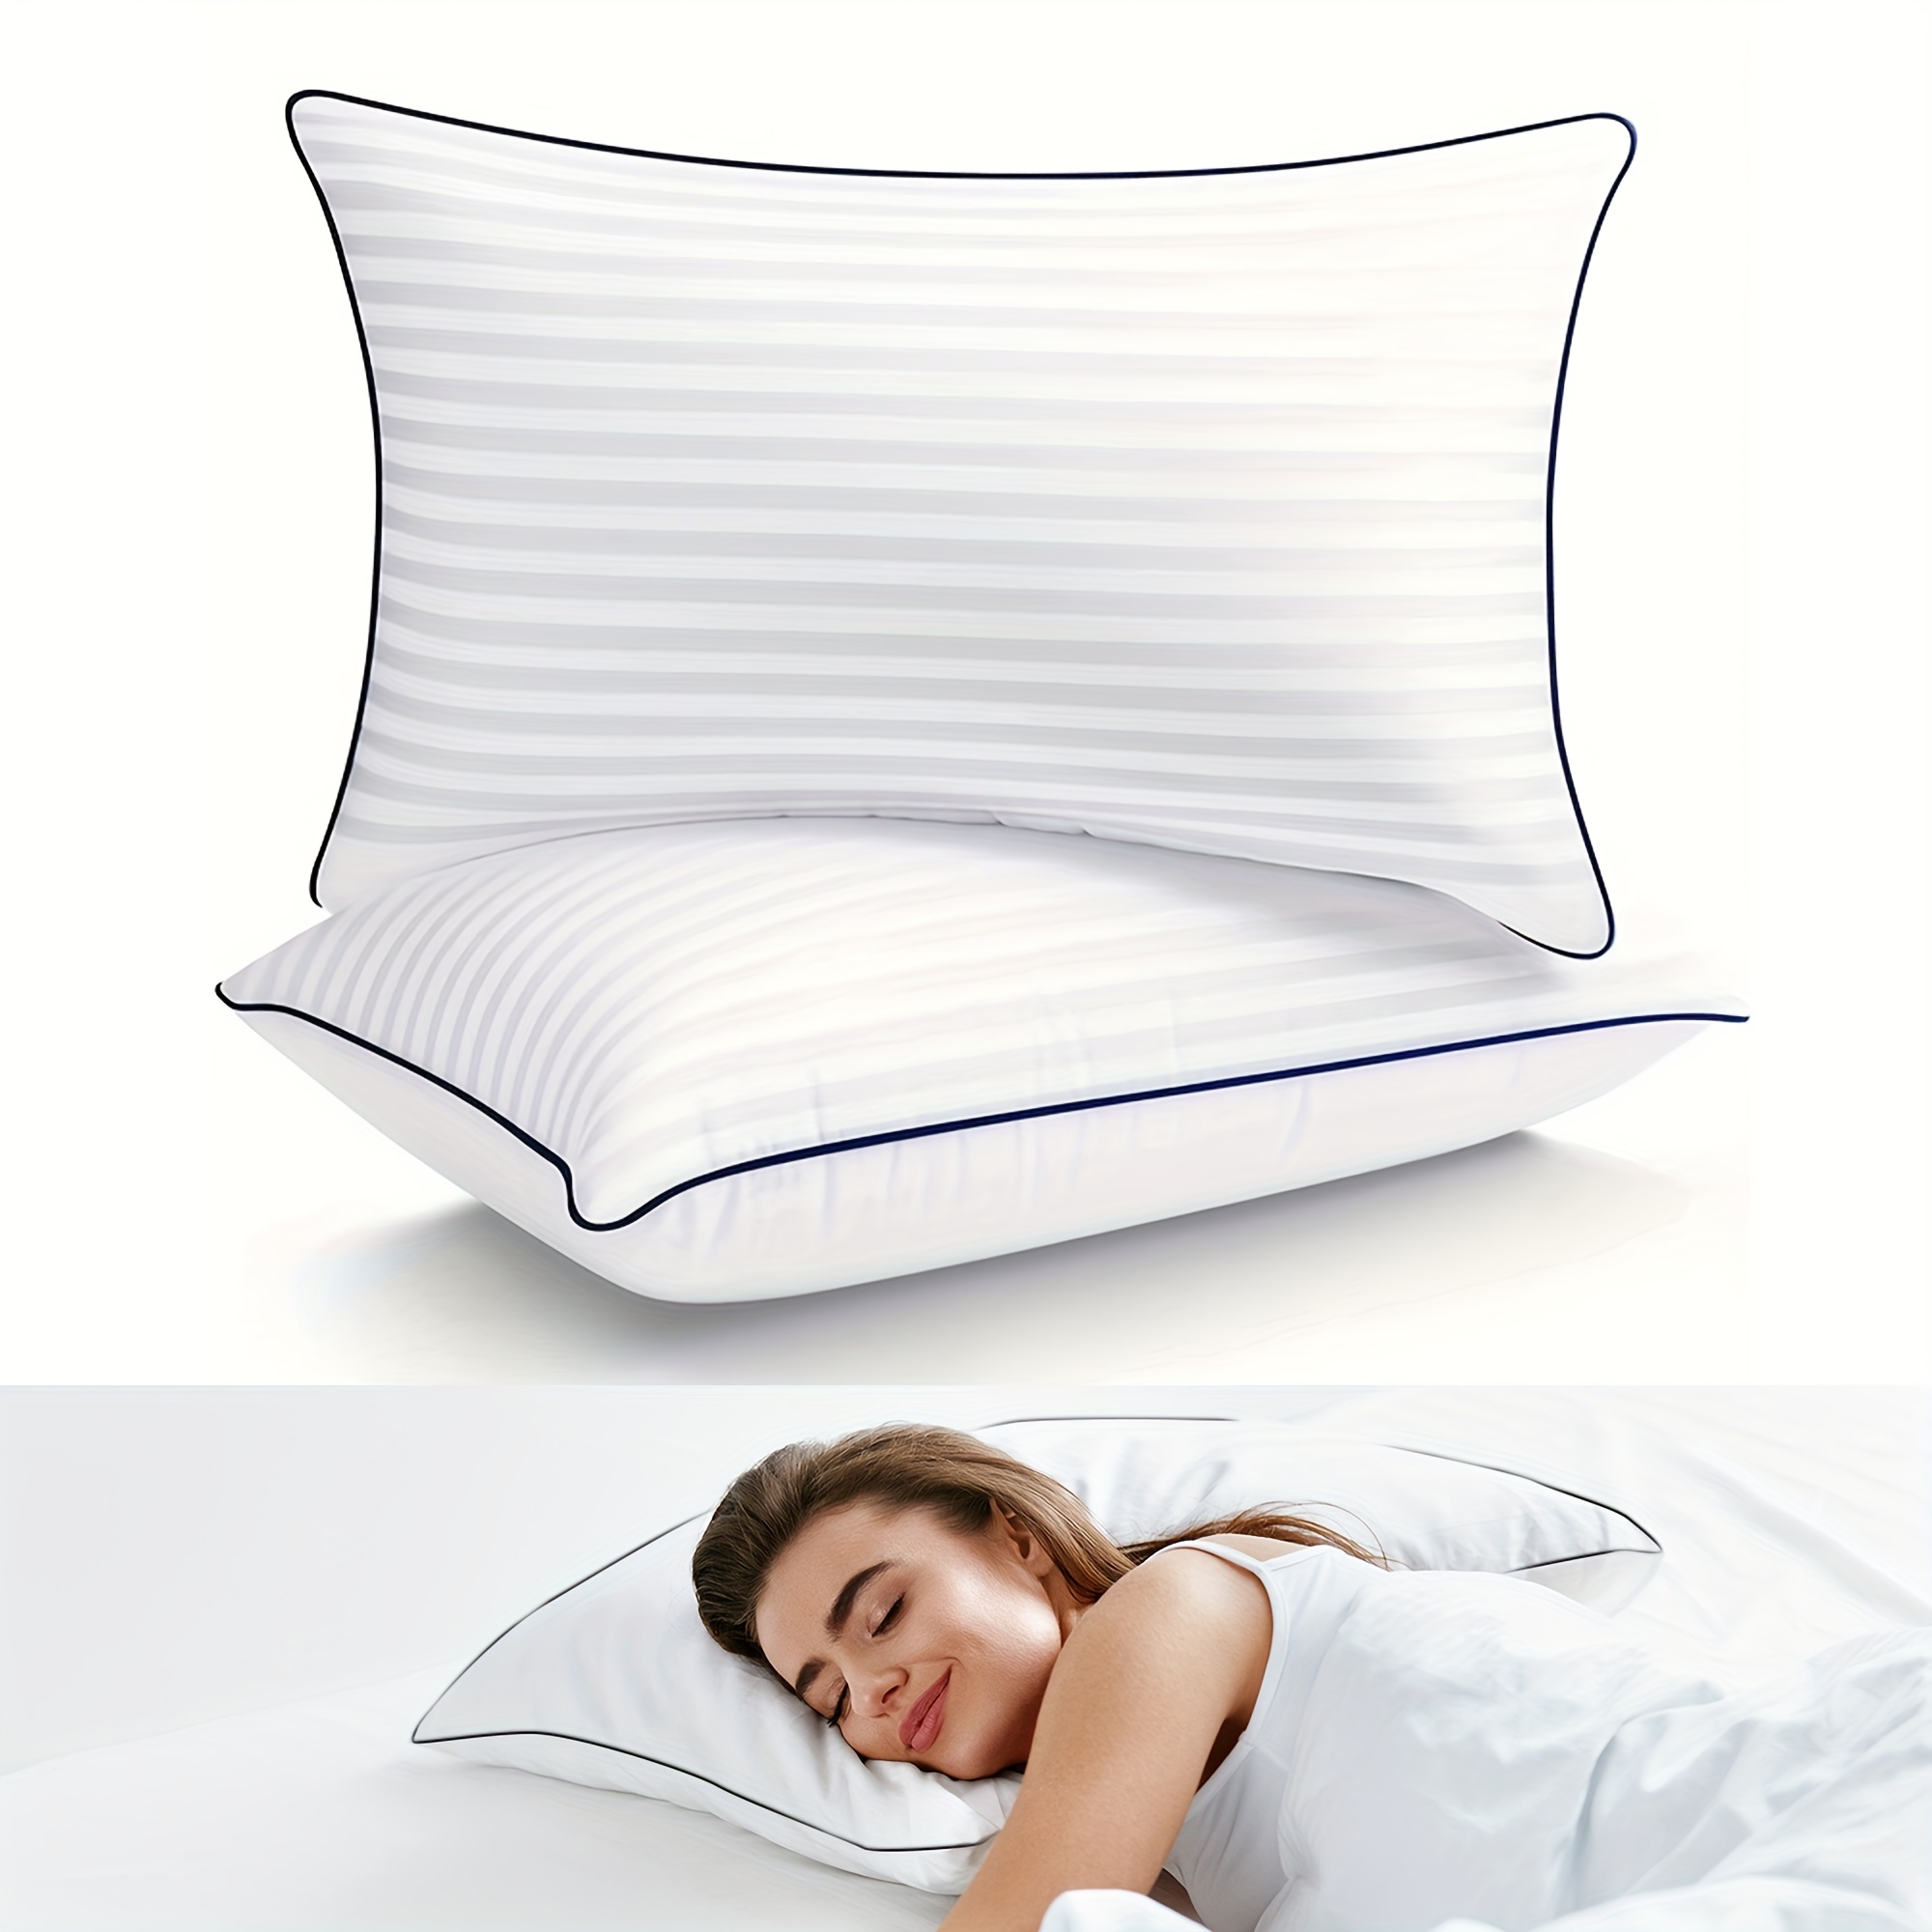 Beckham Hotel Collection Bed Pillows Standard / Queen Size Set of 2 - Down  Alternative Bedding Gel Cooling Pillow for Back Stomach or Side Sleepers 